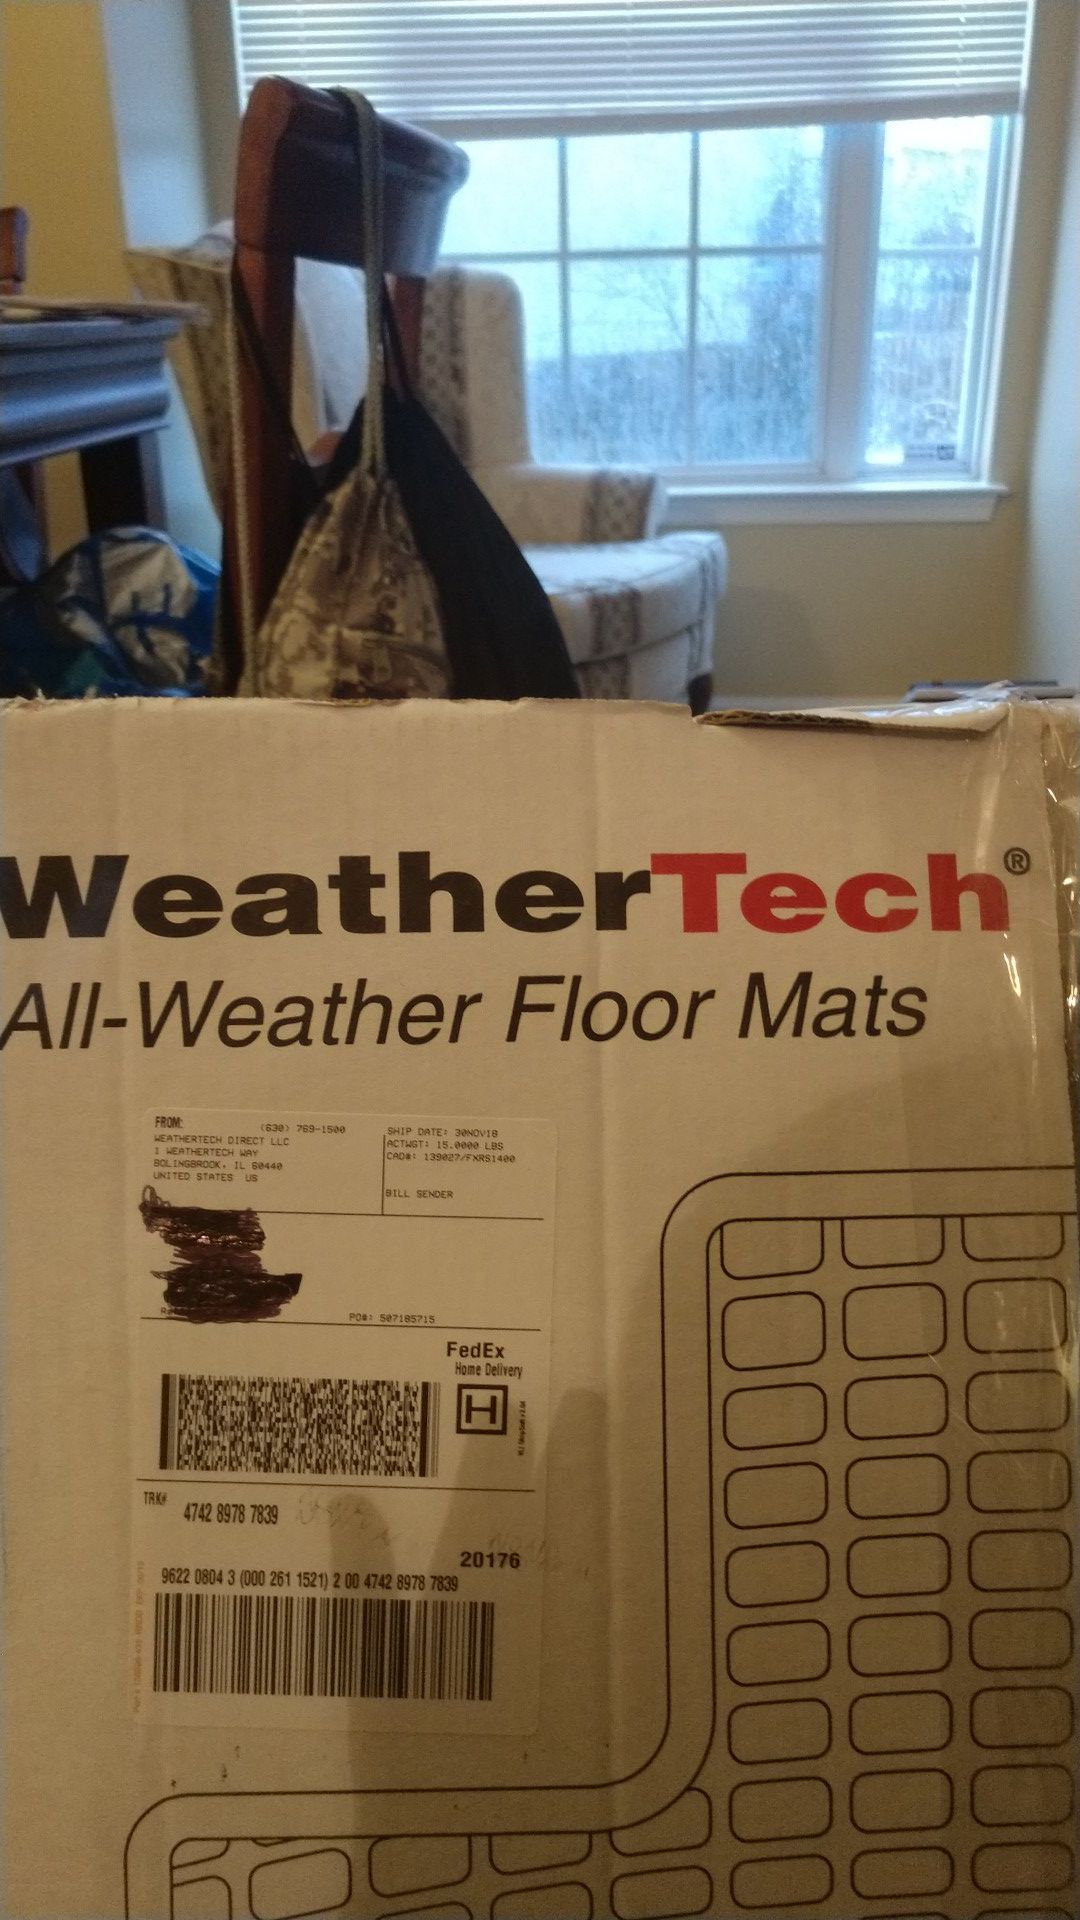 Weathertech floor mats front and back